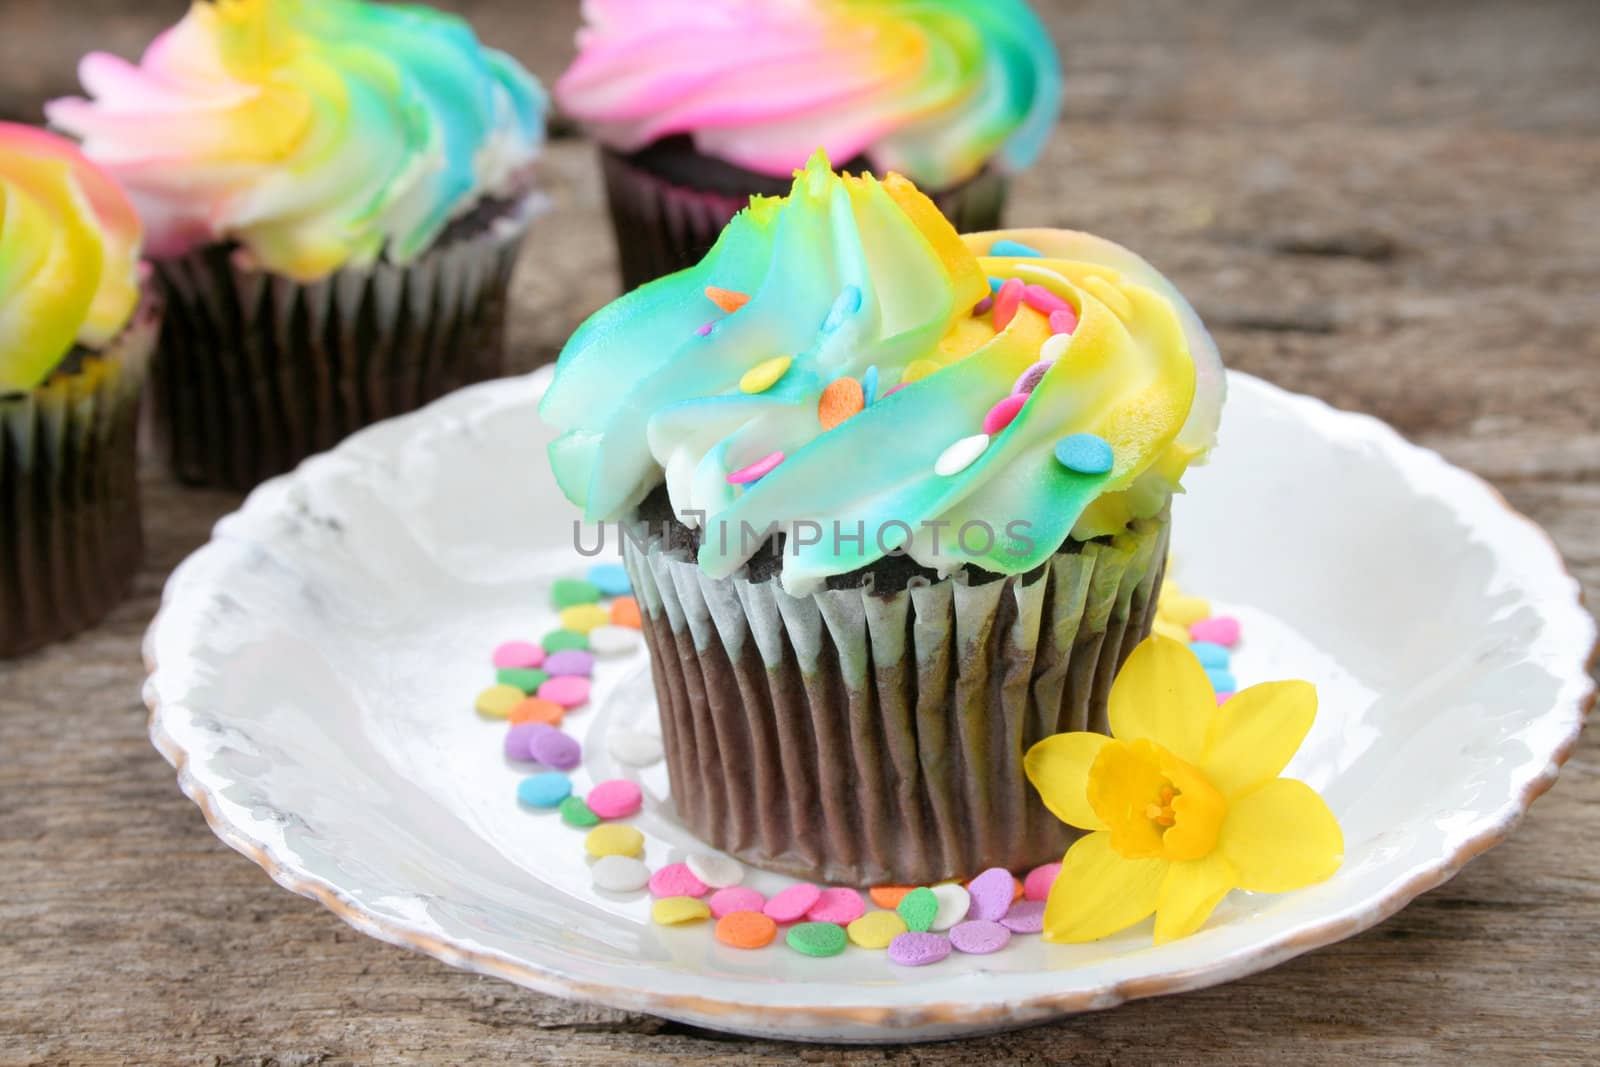 Chocolate cup cakes with sprinkles and a spring flower on the side.